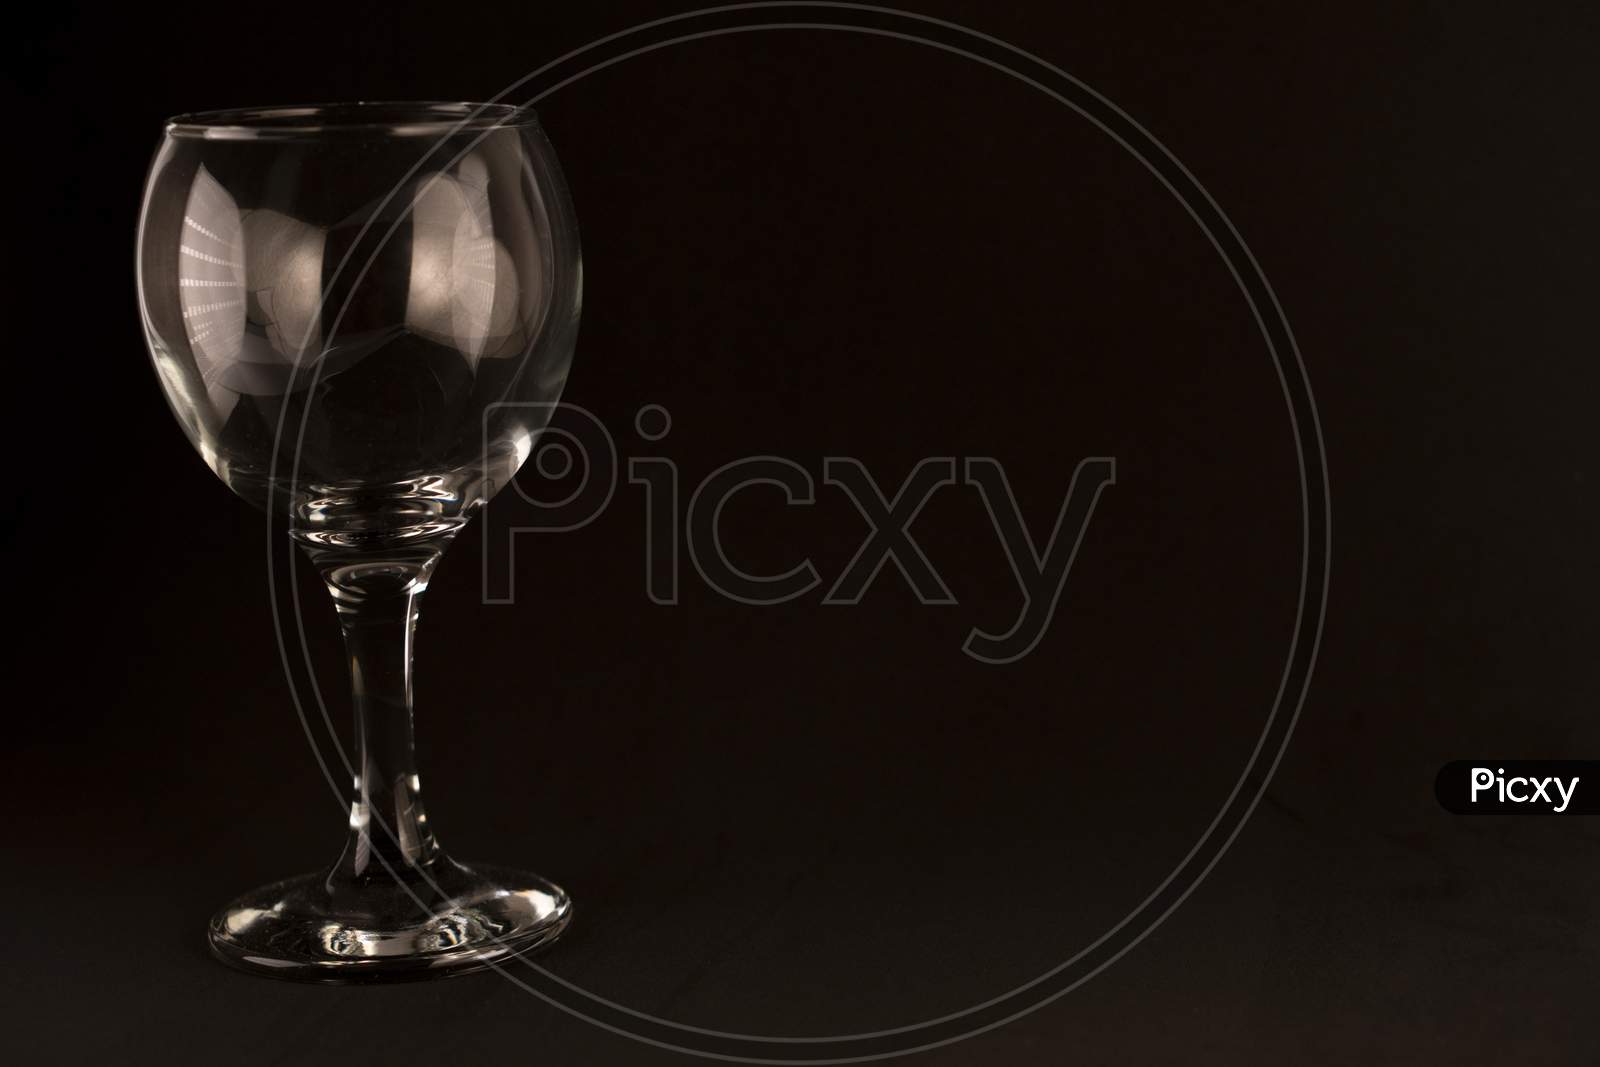 picture of empty wine glass on a black background